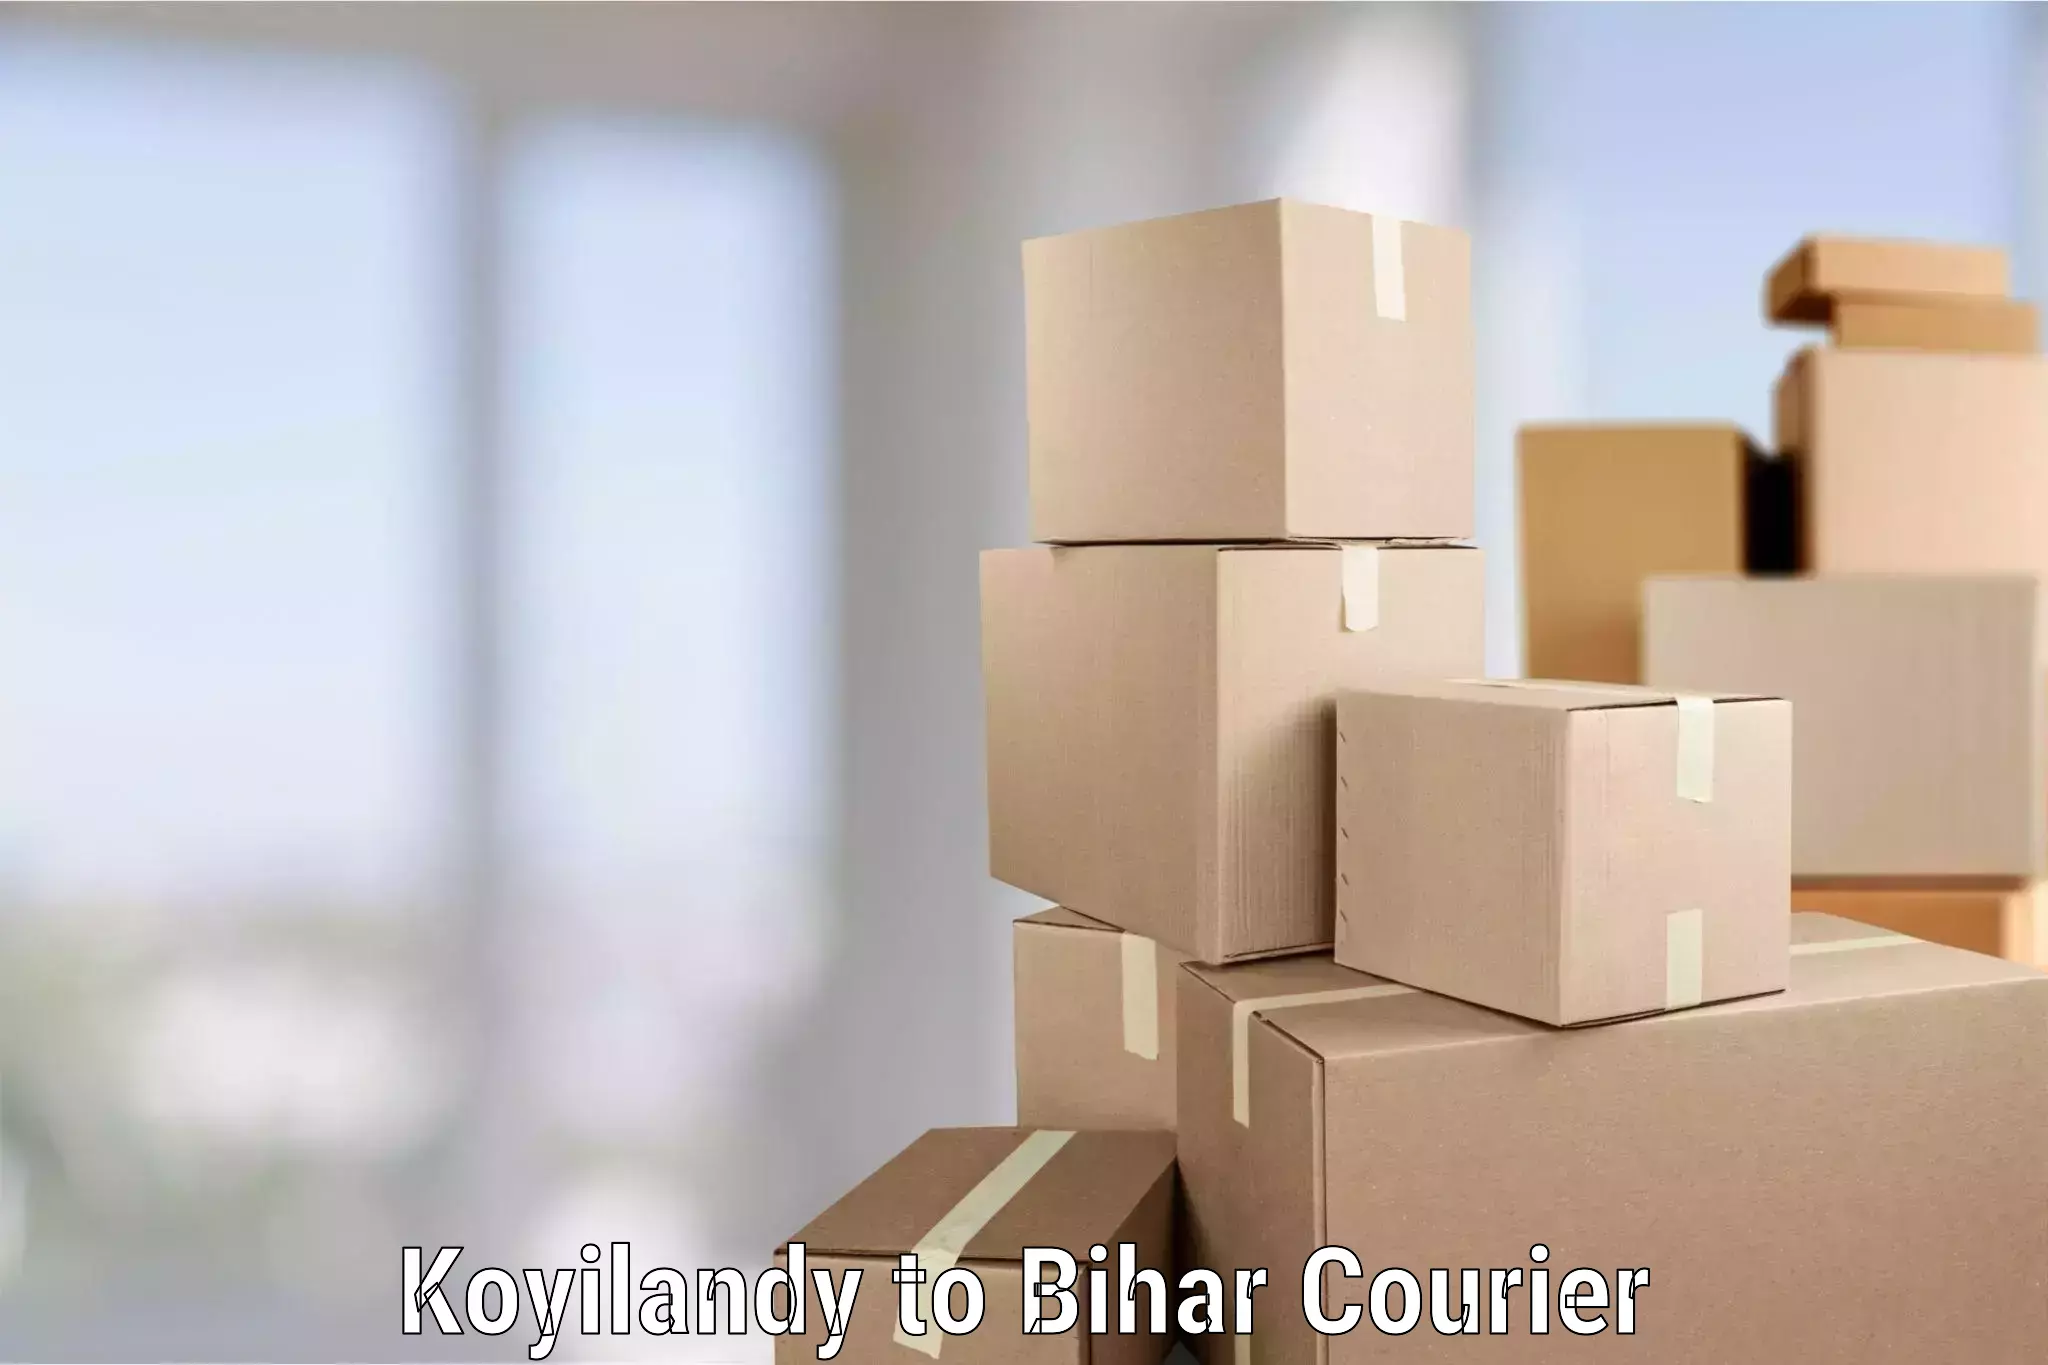 Trusted relocation experts in Koyilandy to Rajgir